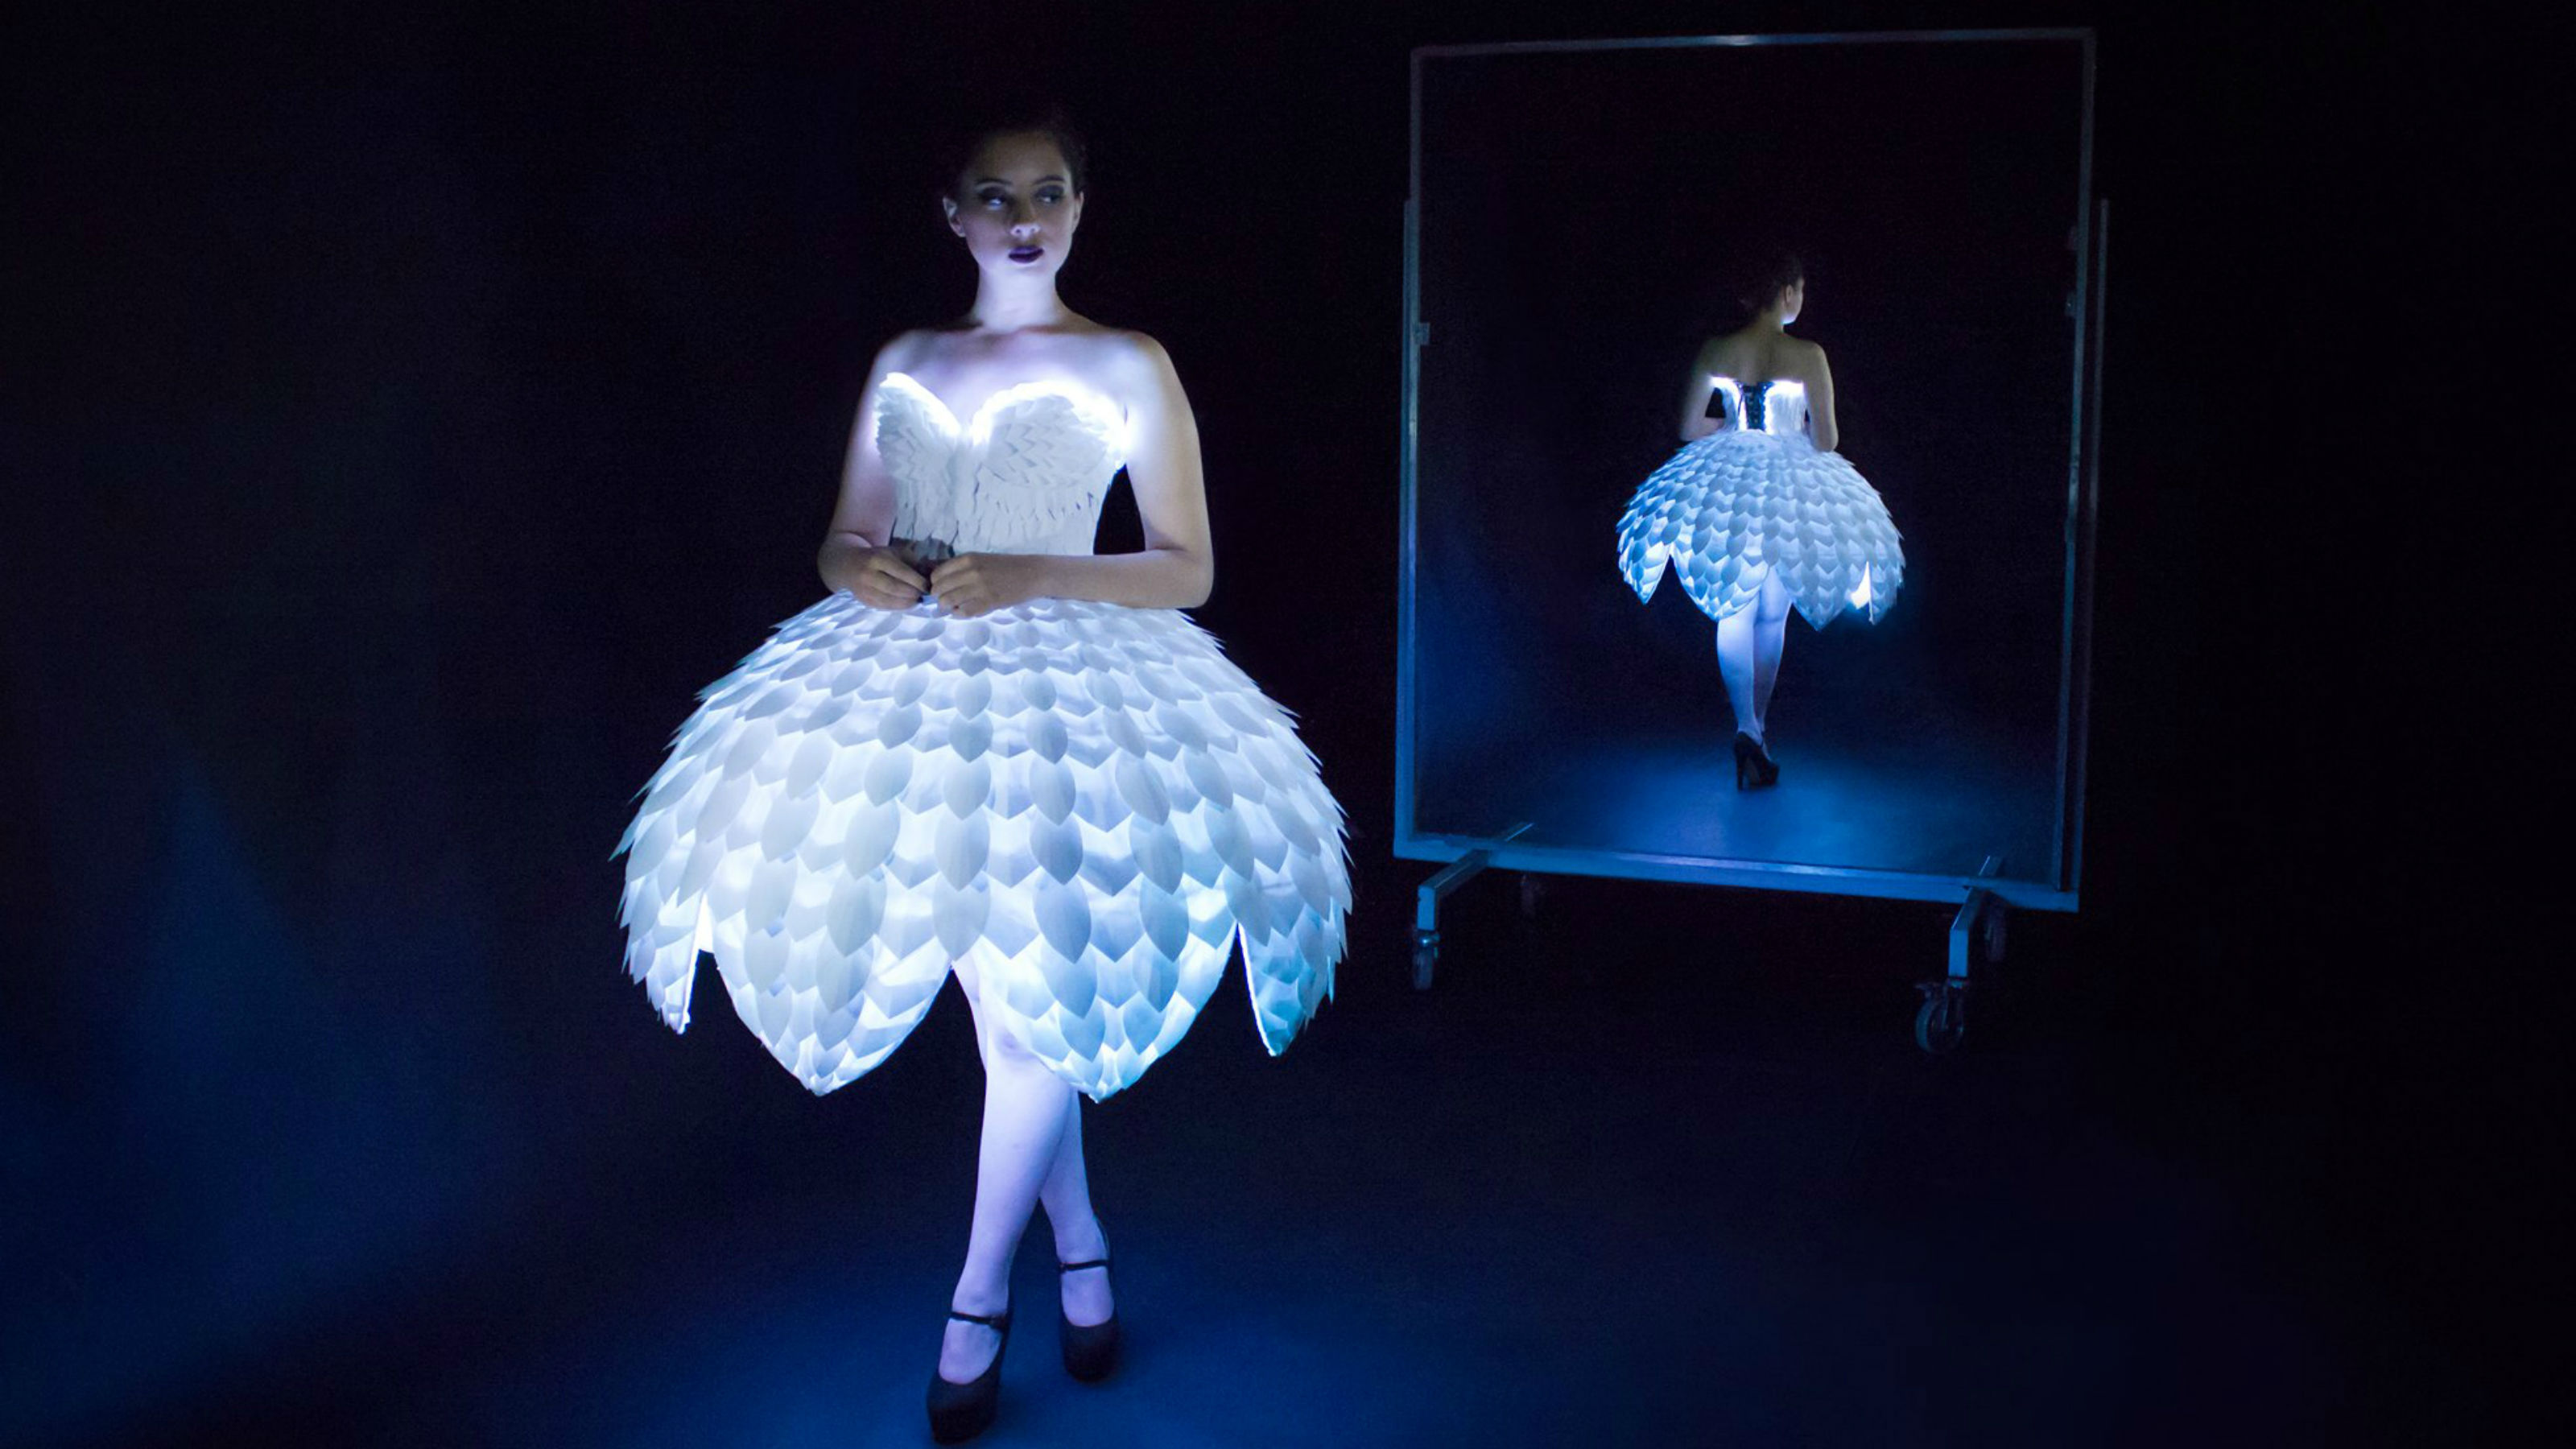 Wearable technology on show | School of Design Innovation | Victoria ...